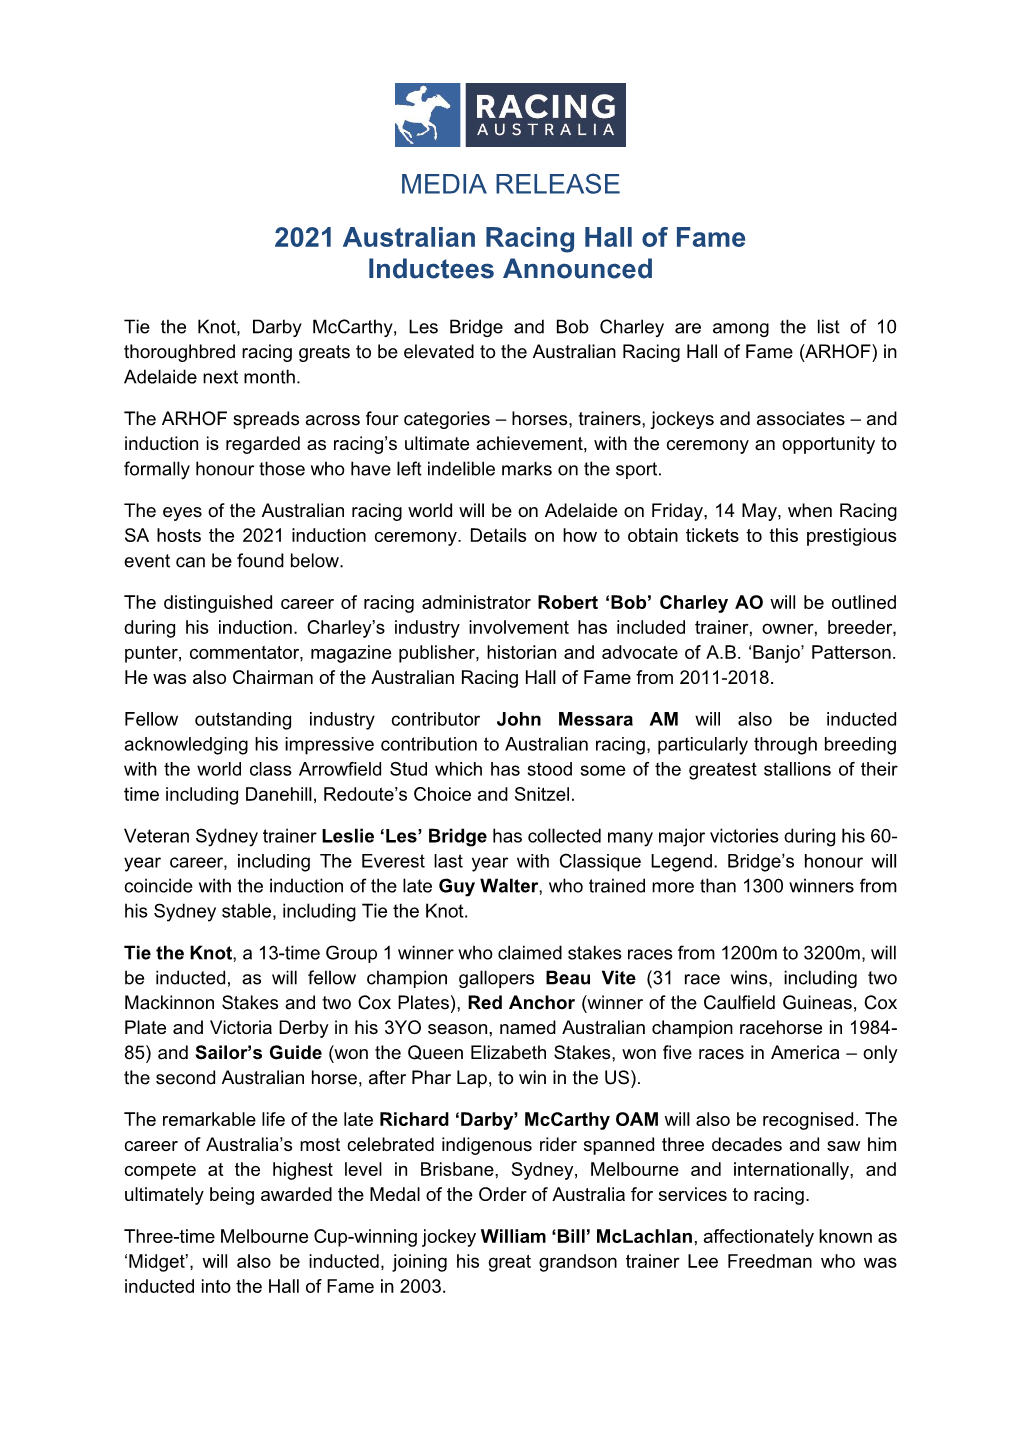 MEDIA RELEASE 2021 Australian Racing Hall of Fame Inductees Announced